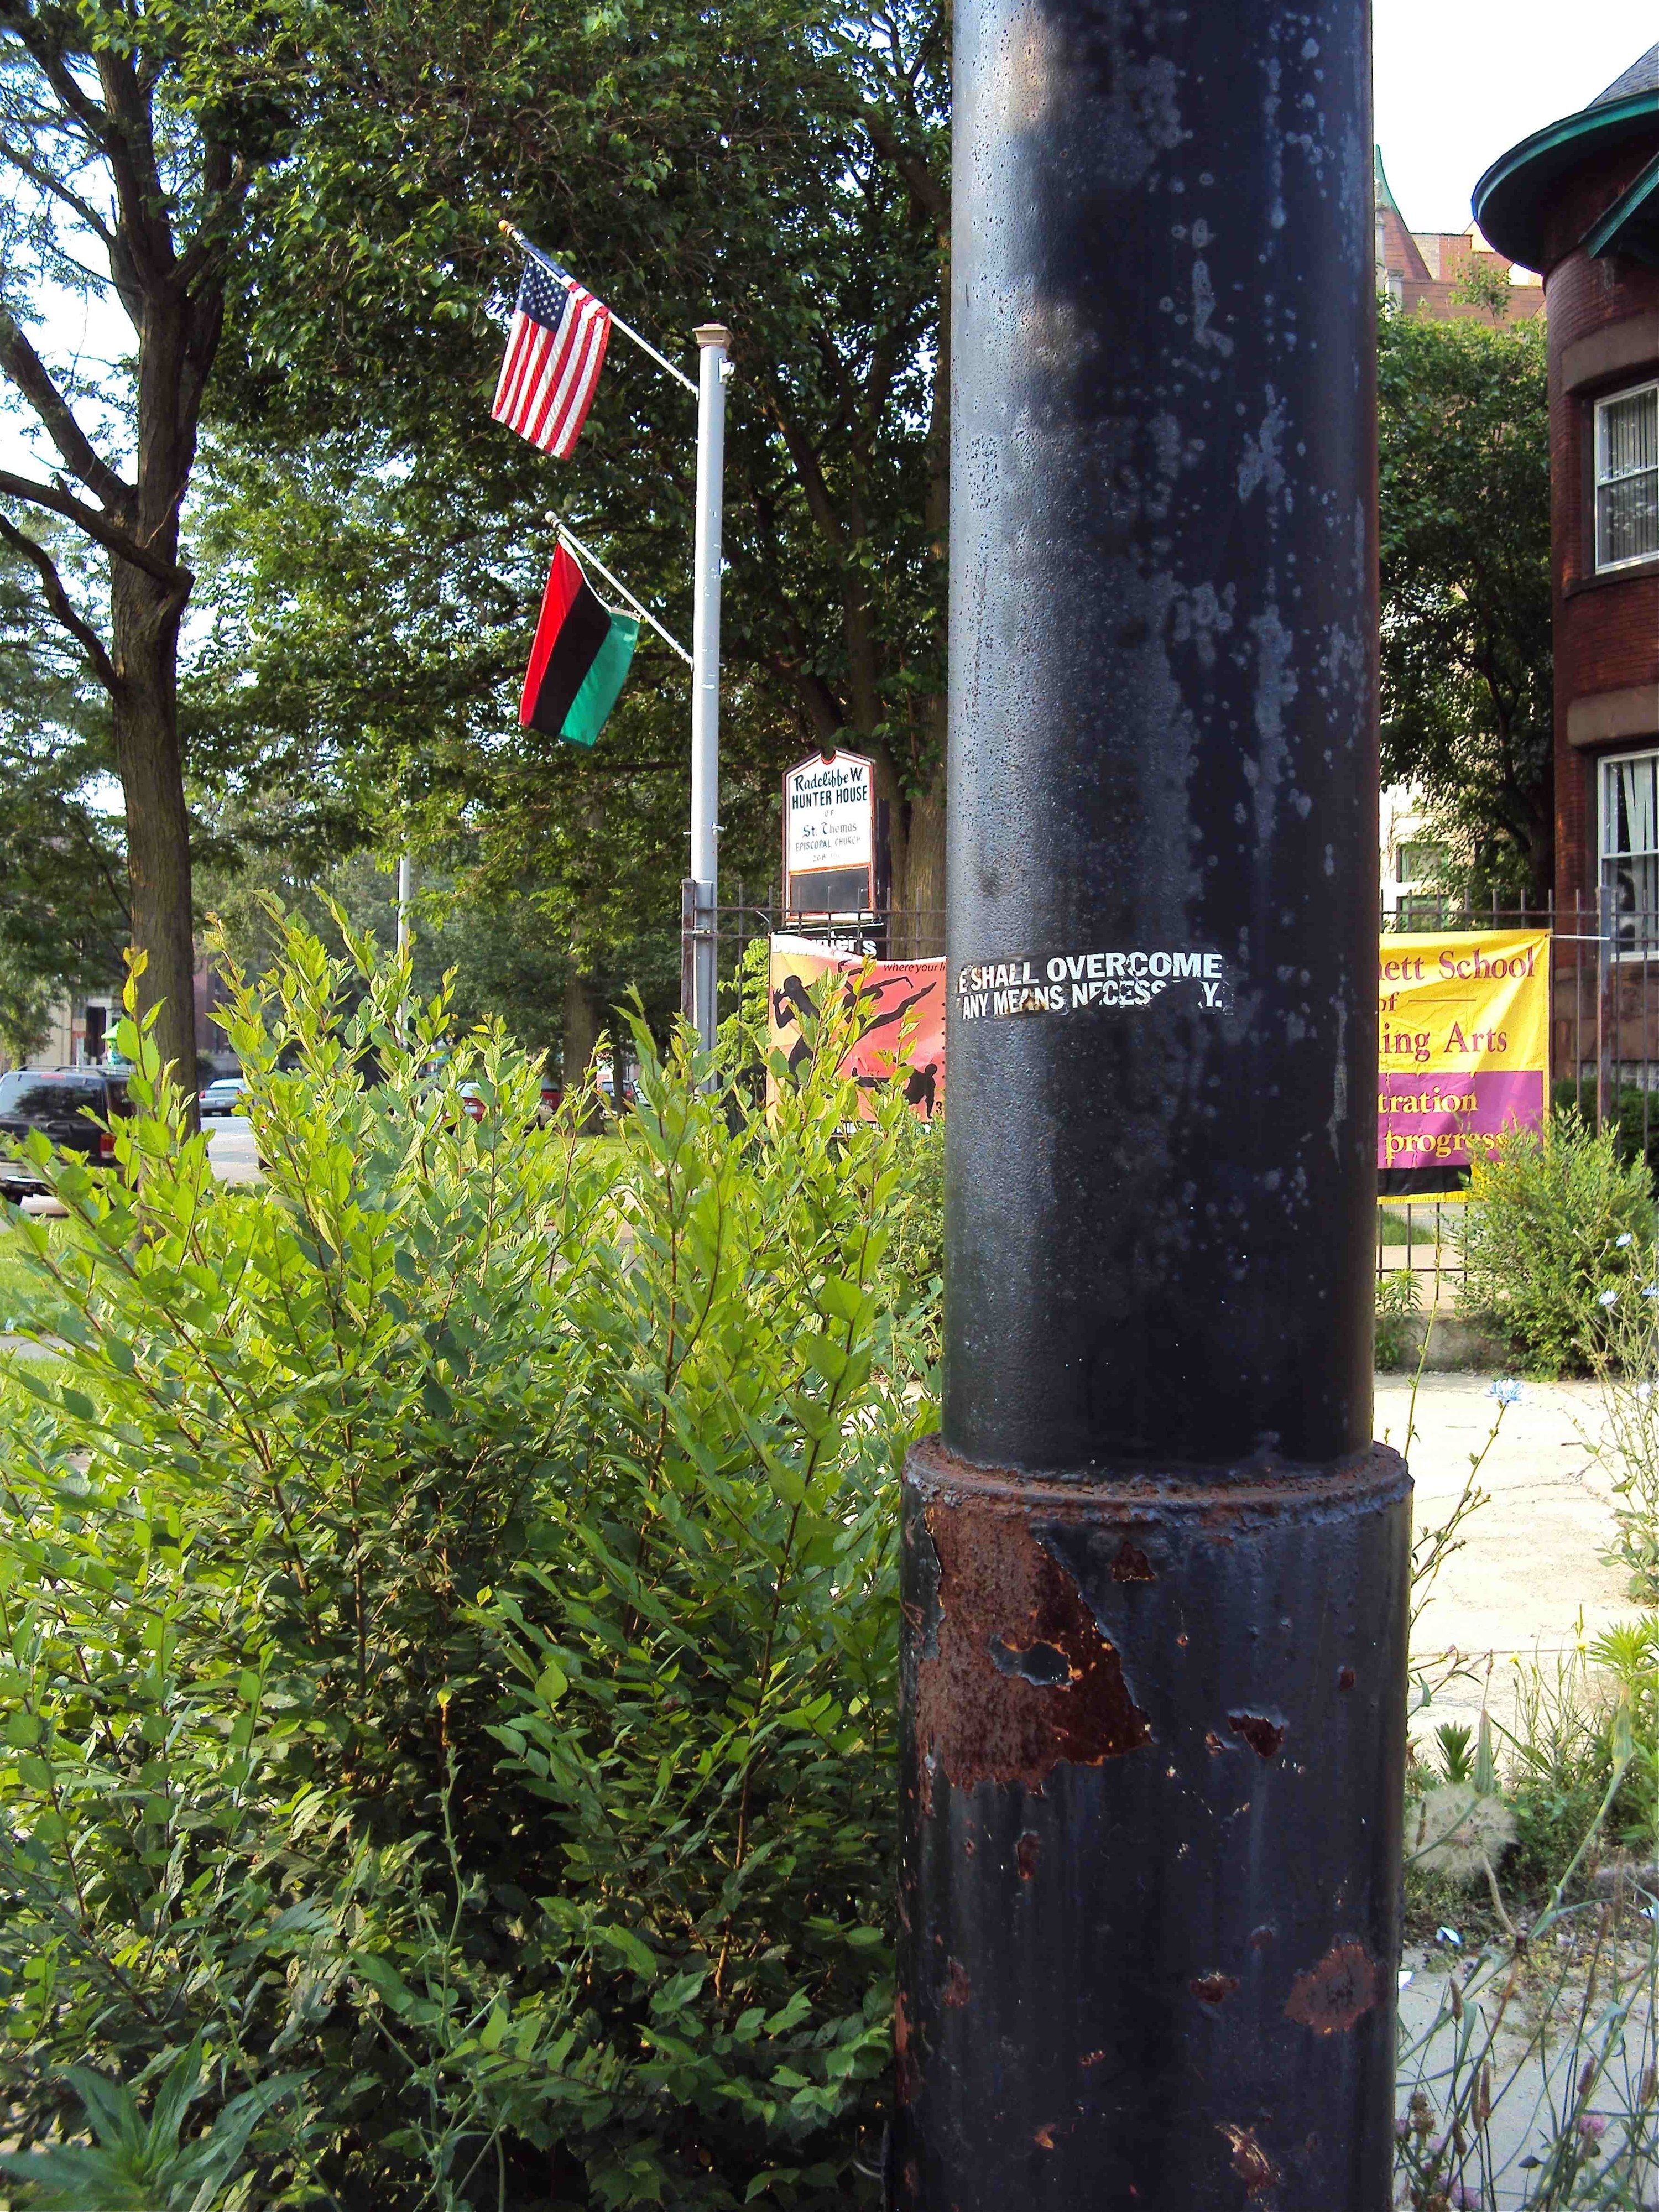 a photograph of a lampost with a torn bumper sticker that says we shall overcome and flags in the background